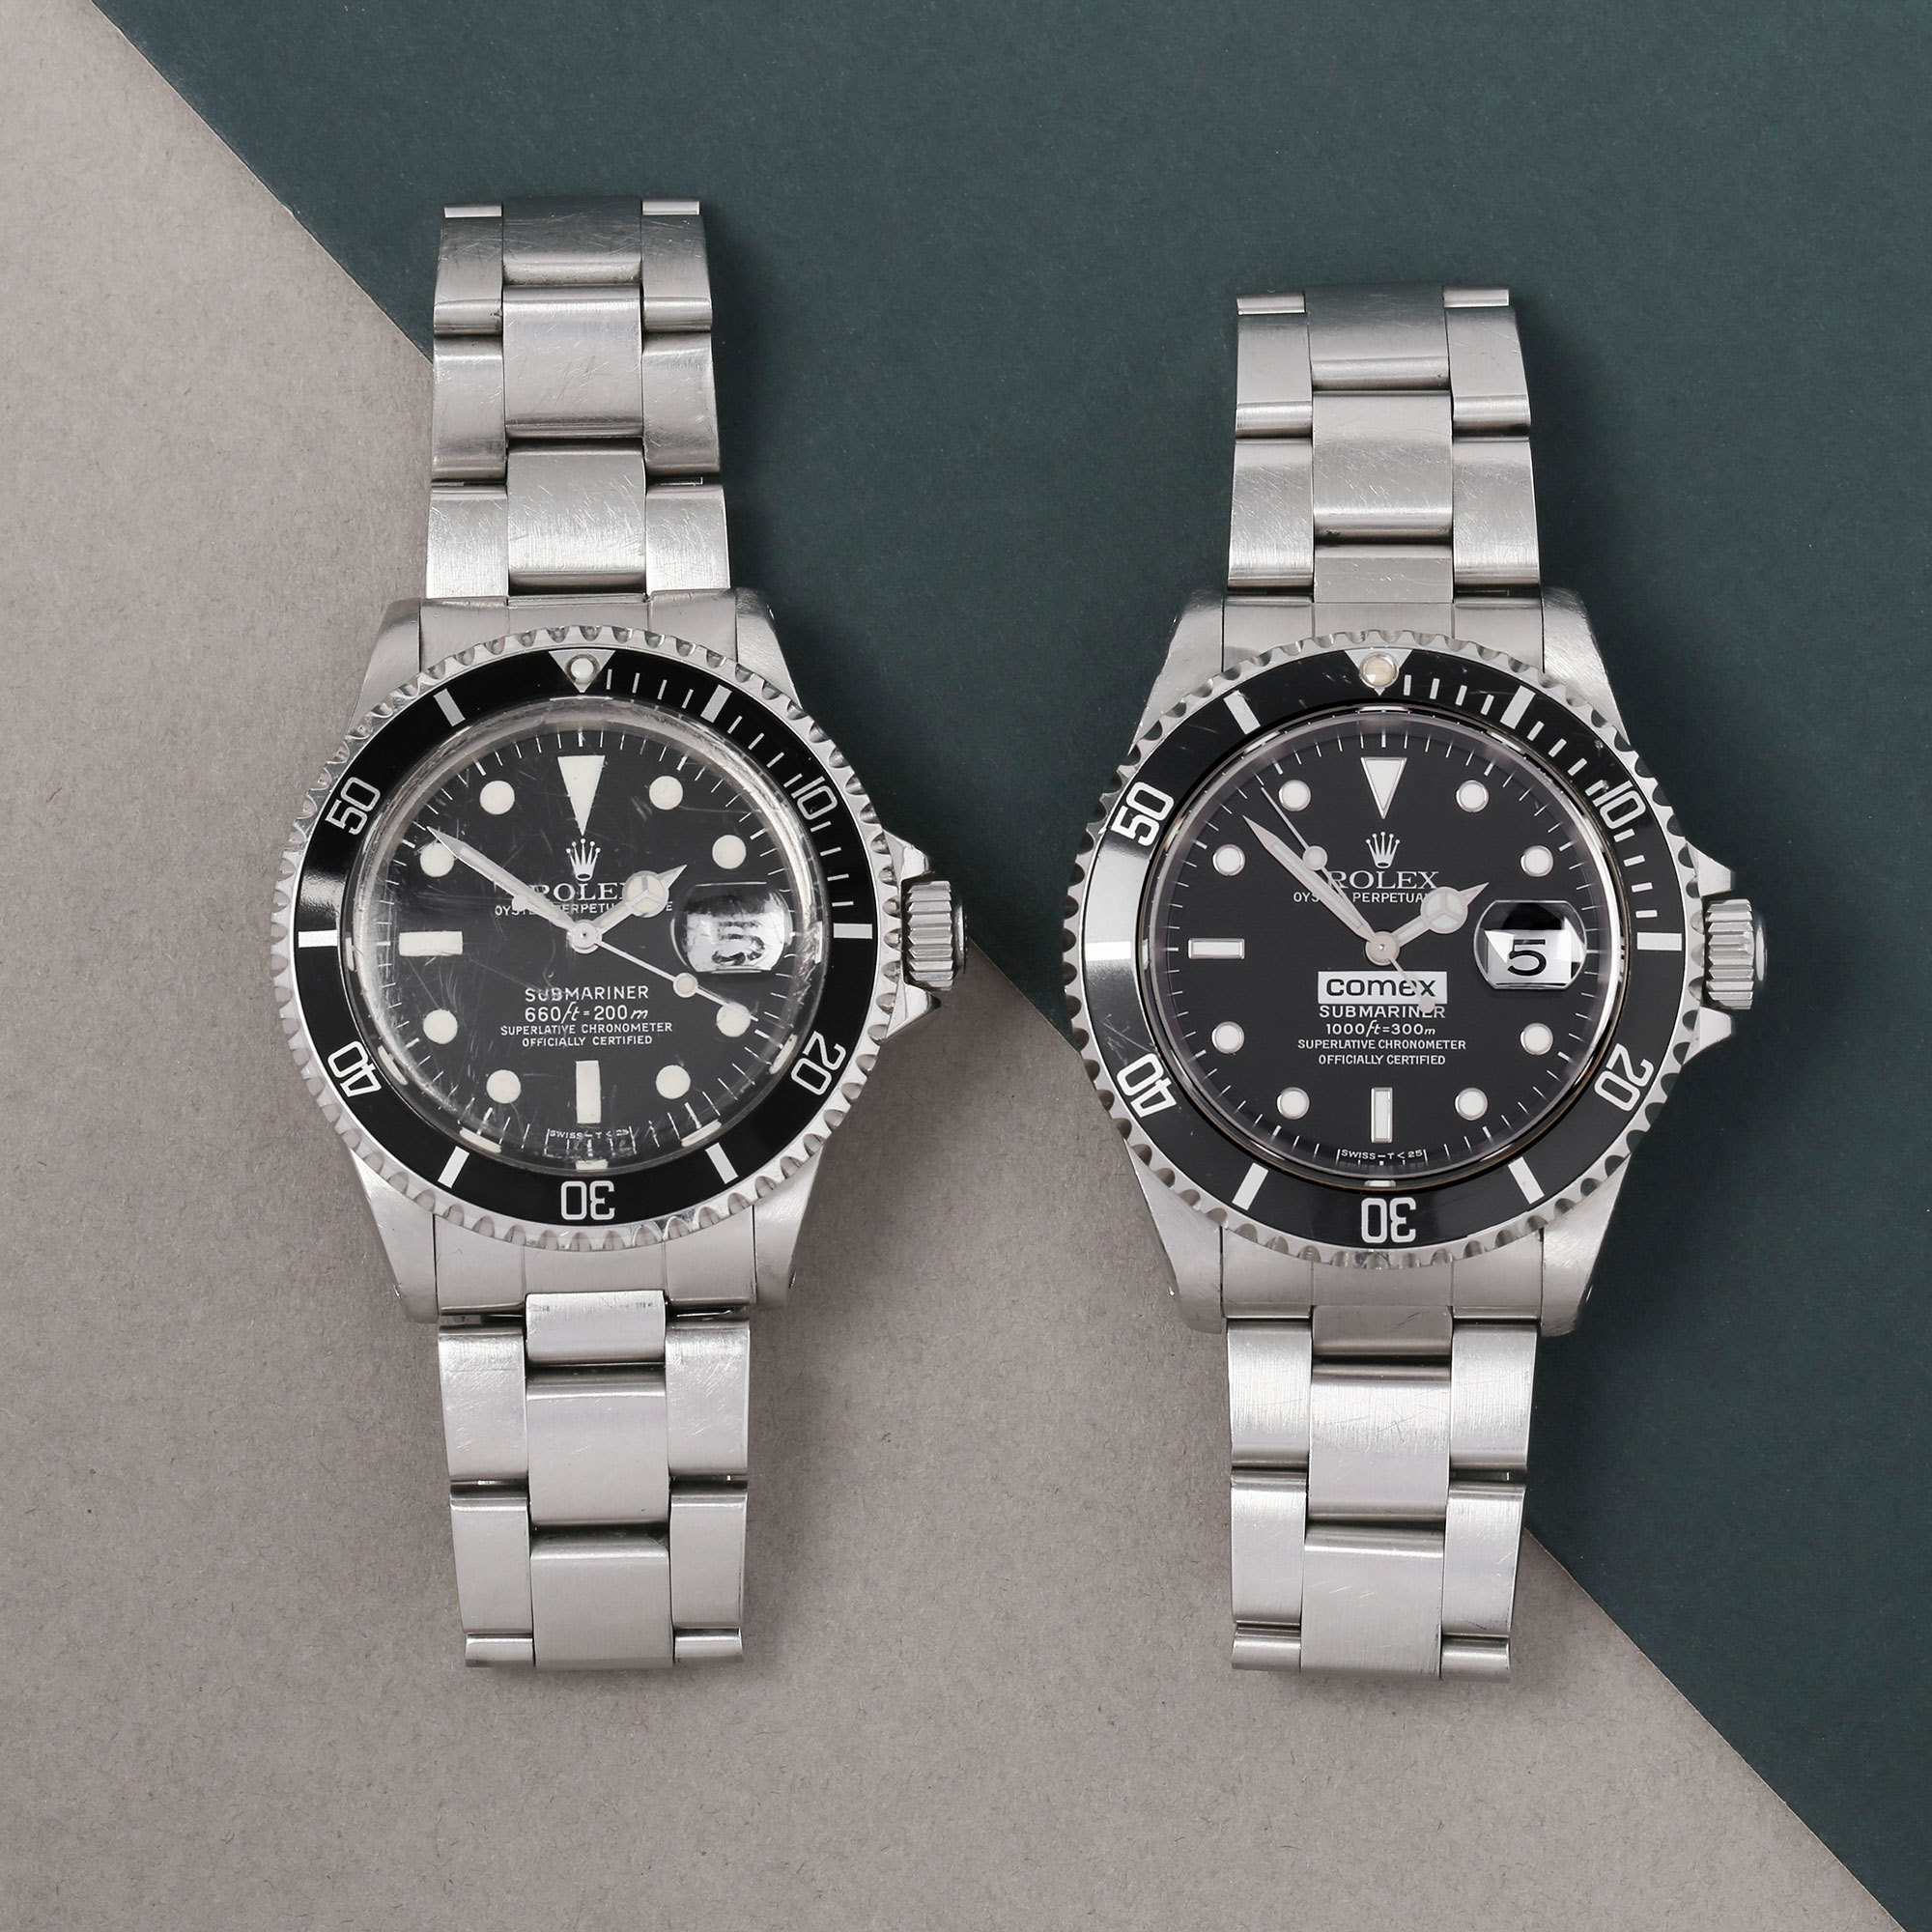 Rolex Submariner 'Comex' Stainless Steel - 1680 Stainless Steel 1680